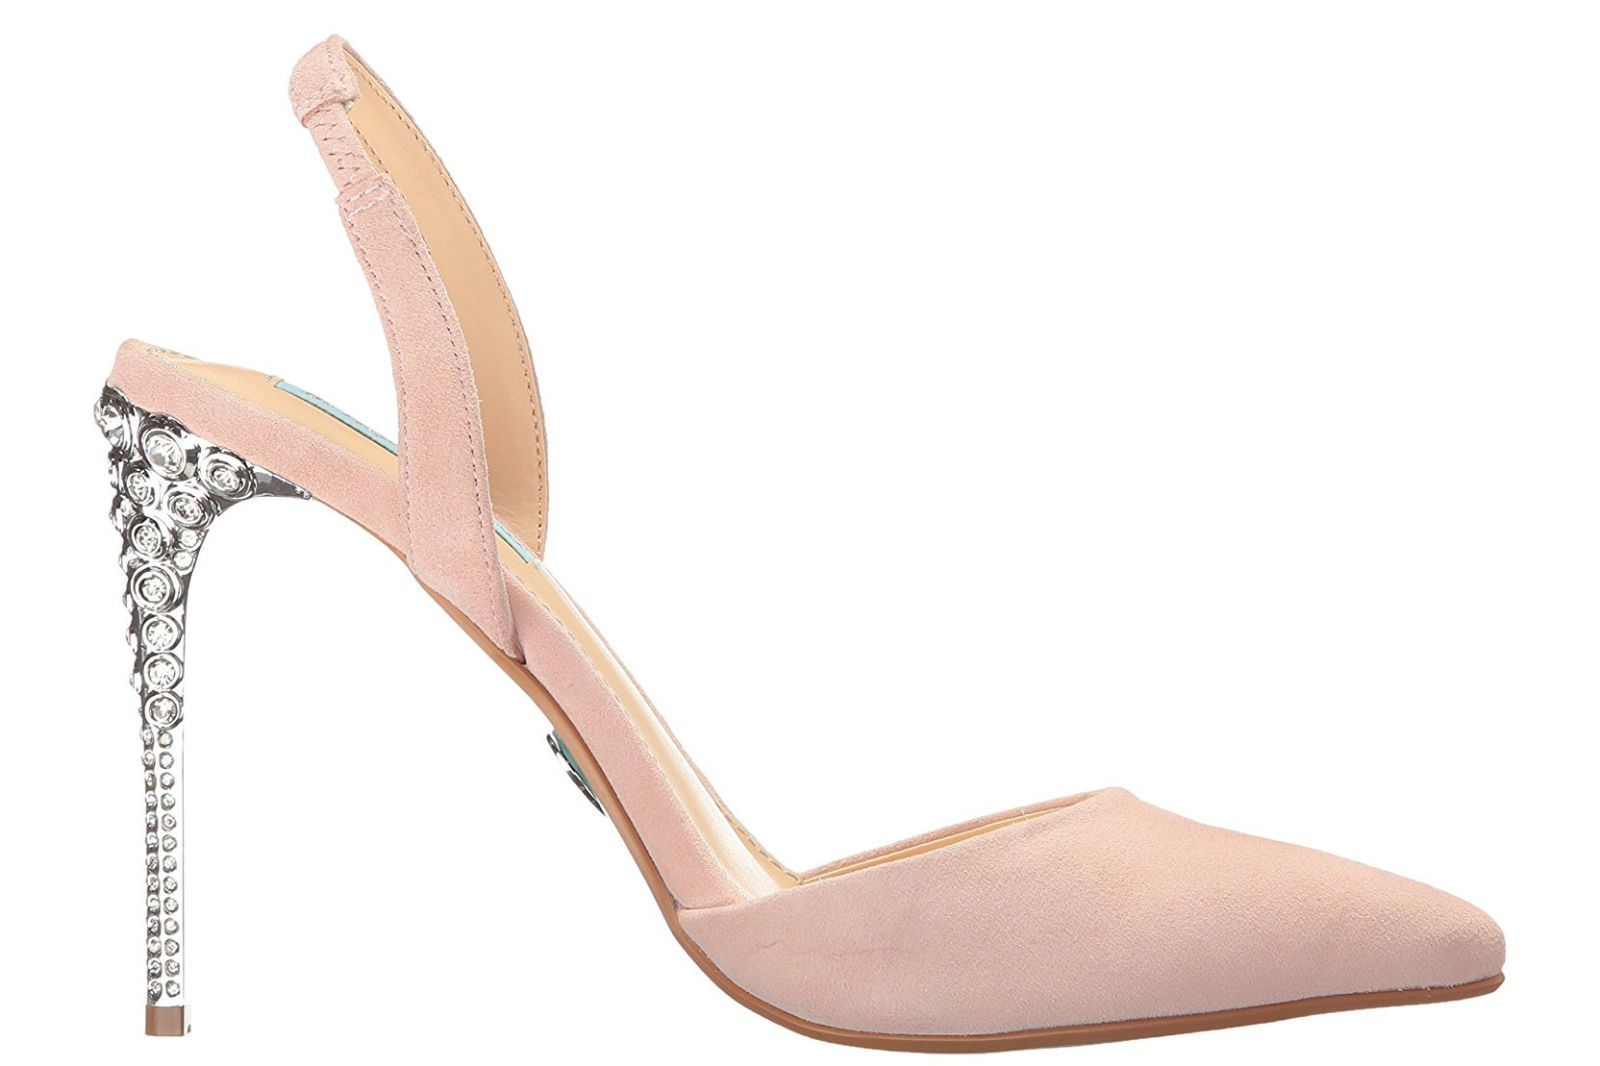 Buy Usaflex Women's Dress Pump, Stylish and Comfortable 3.5 Inch Heels for  Women, Light Pink, Size 7 at Amazon.in